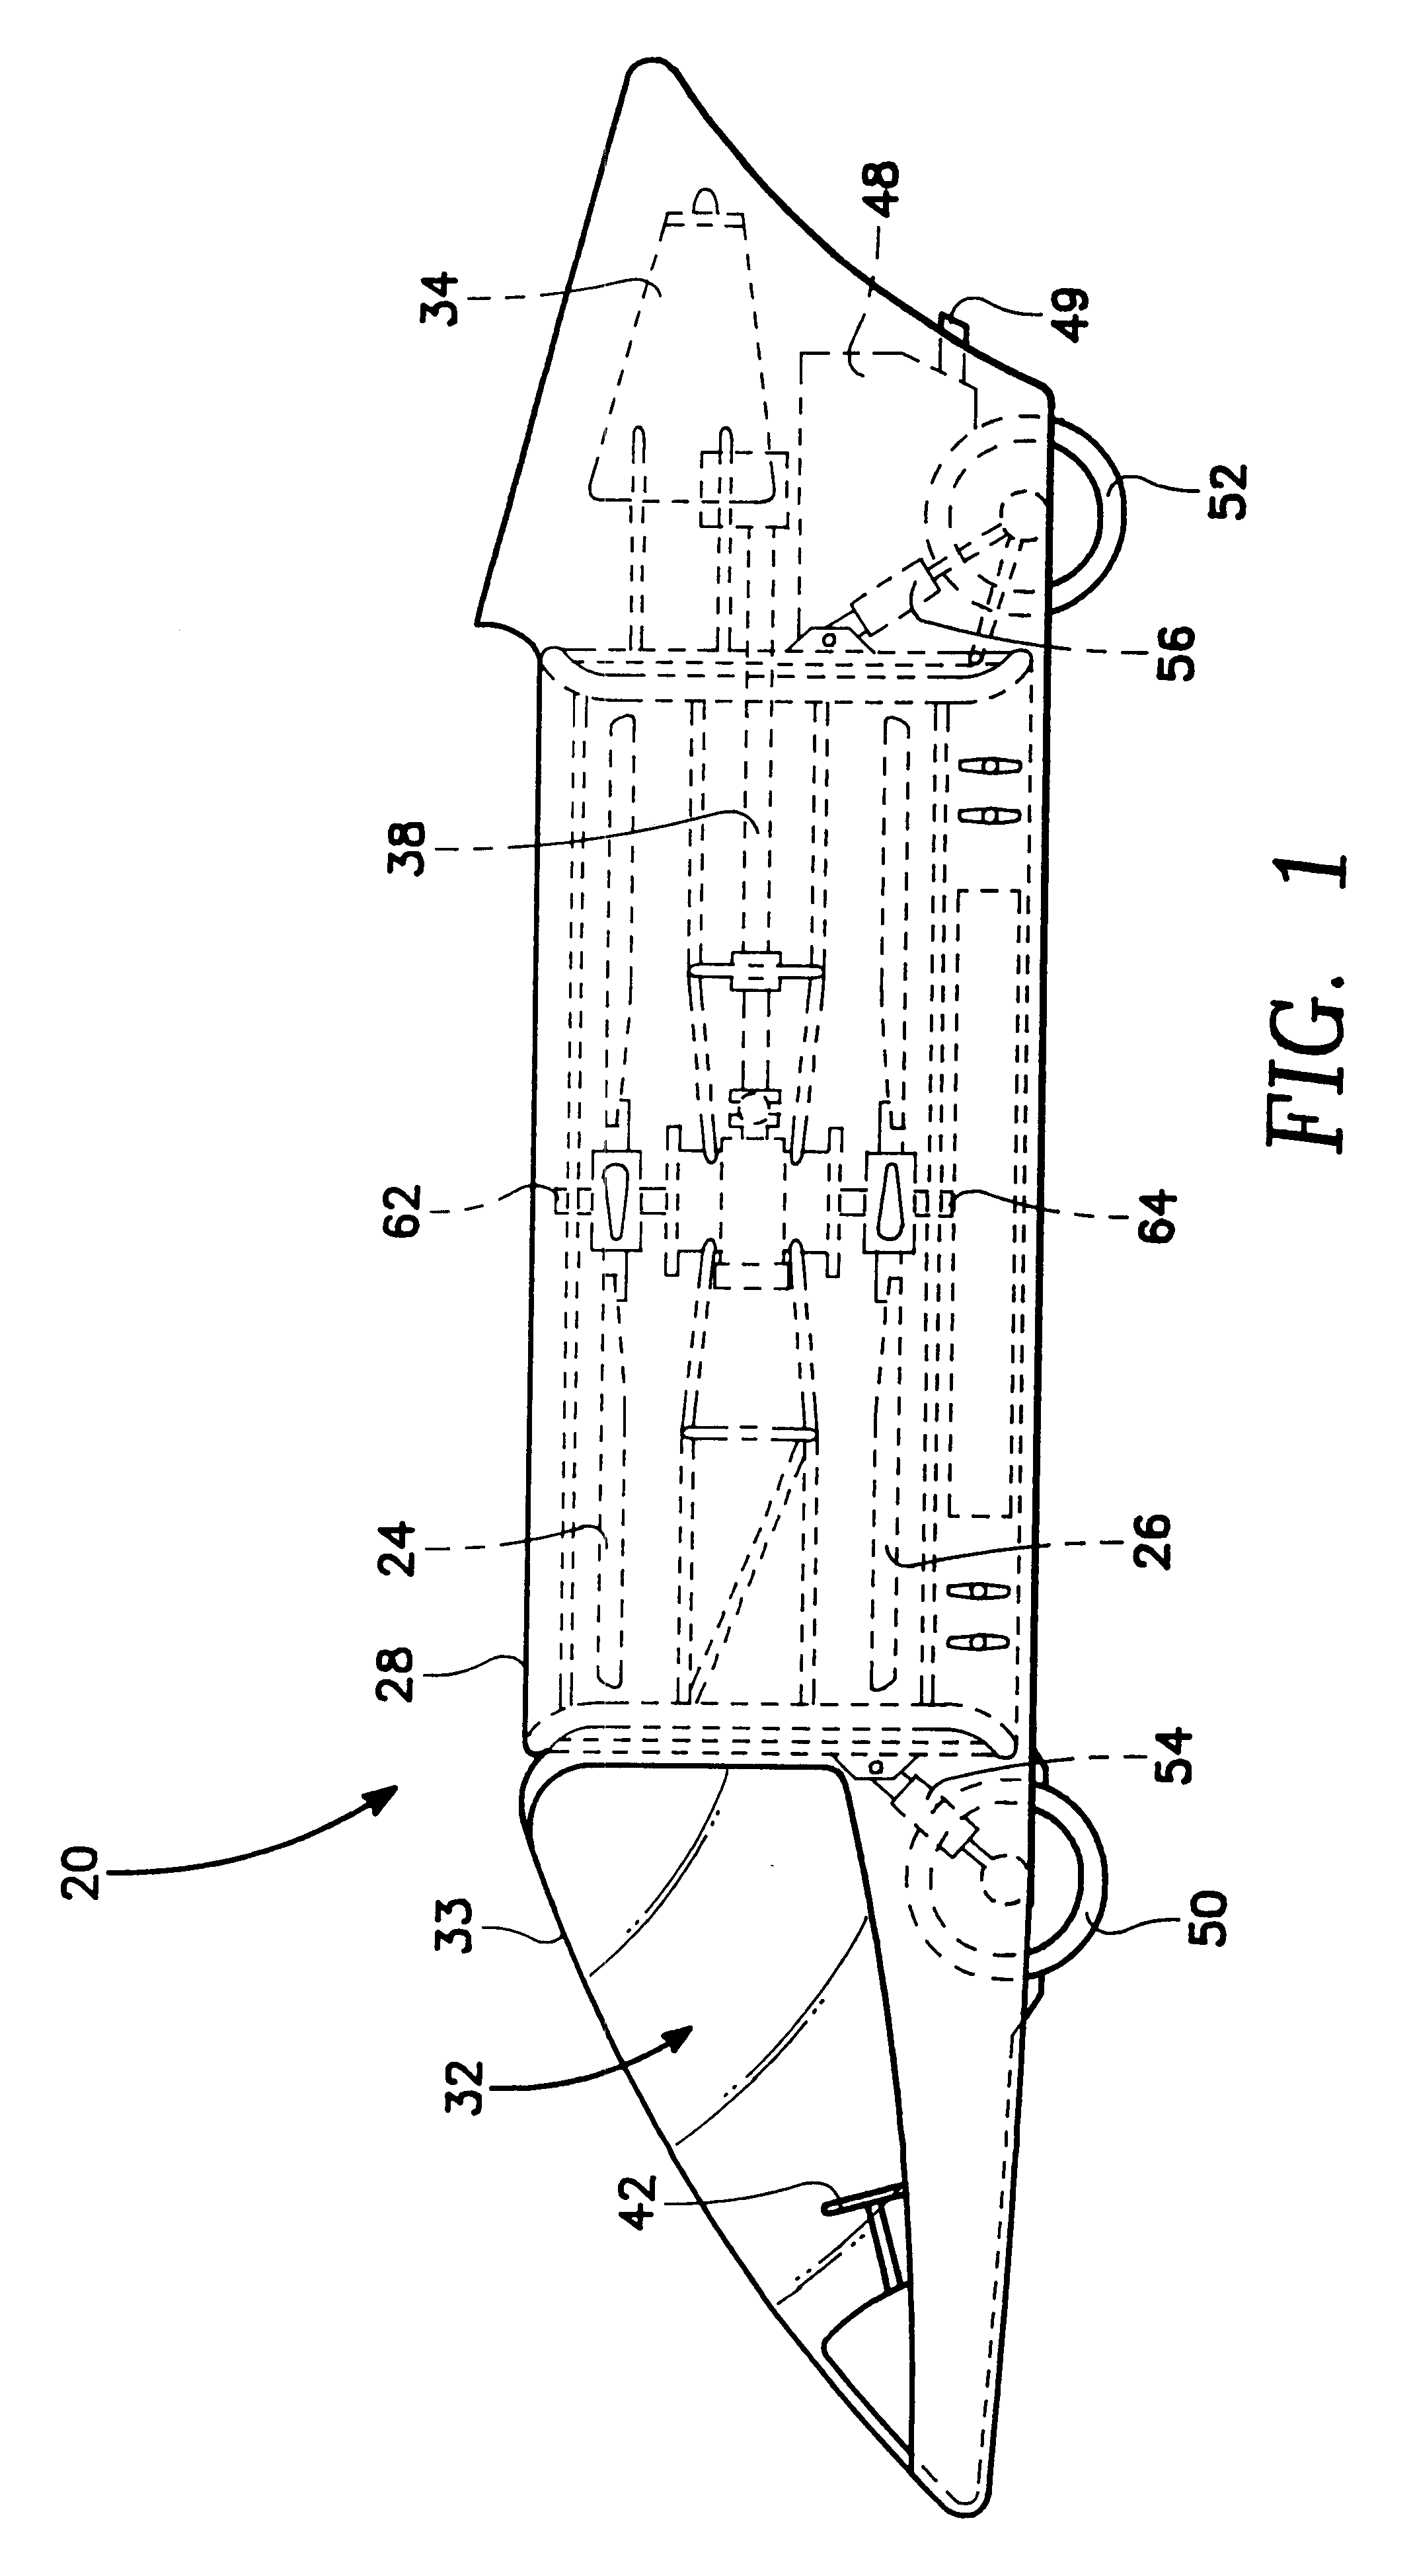 Counter rotating ducted fan flying vehicle